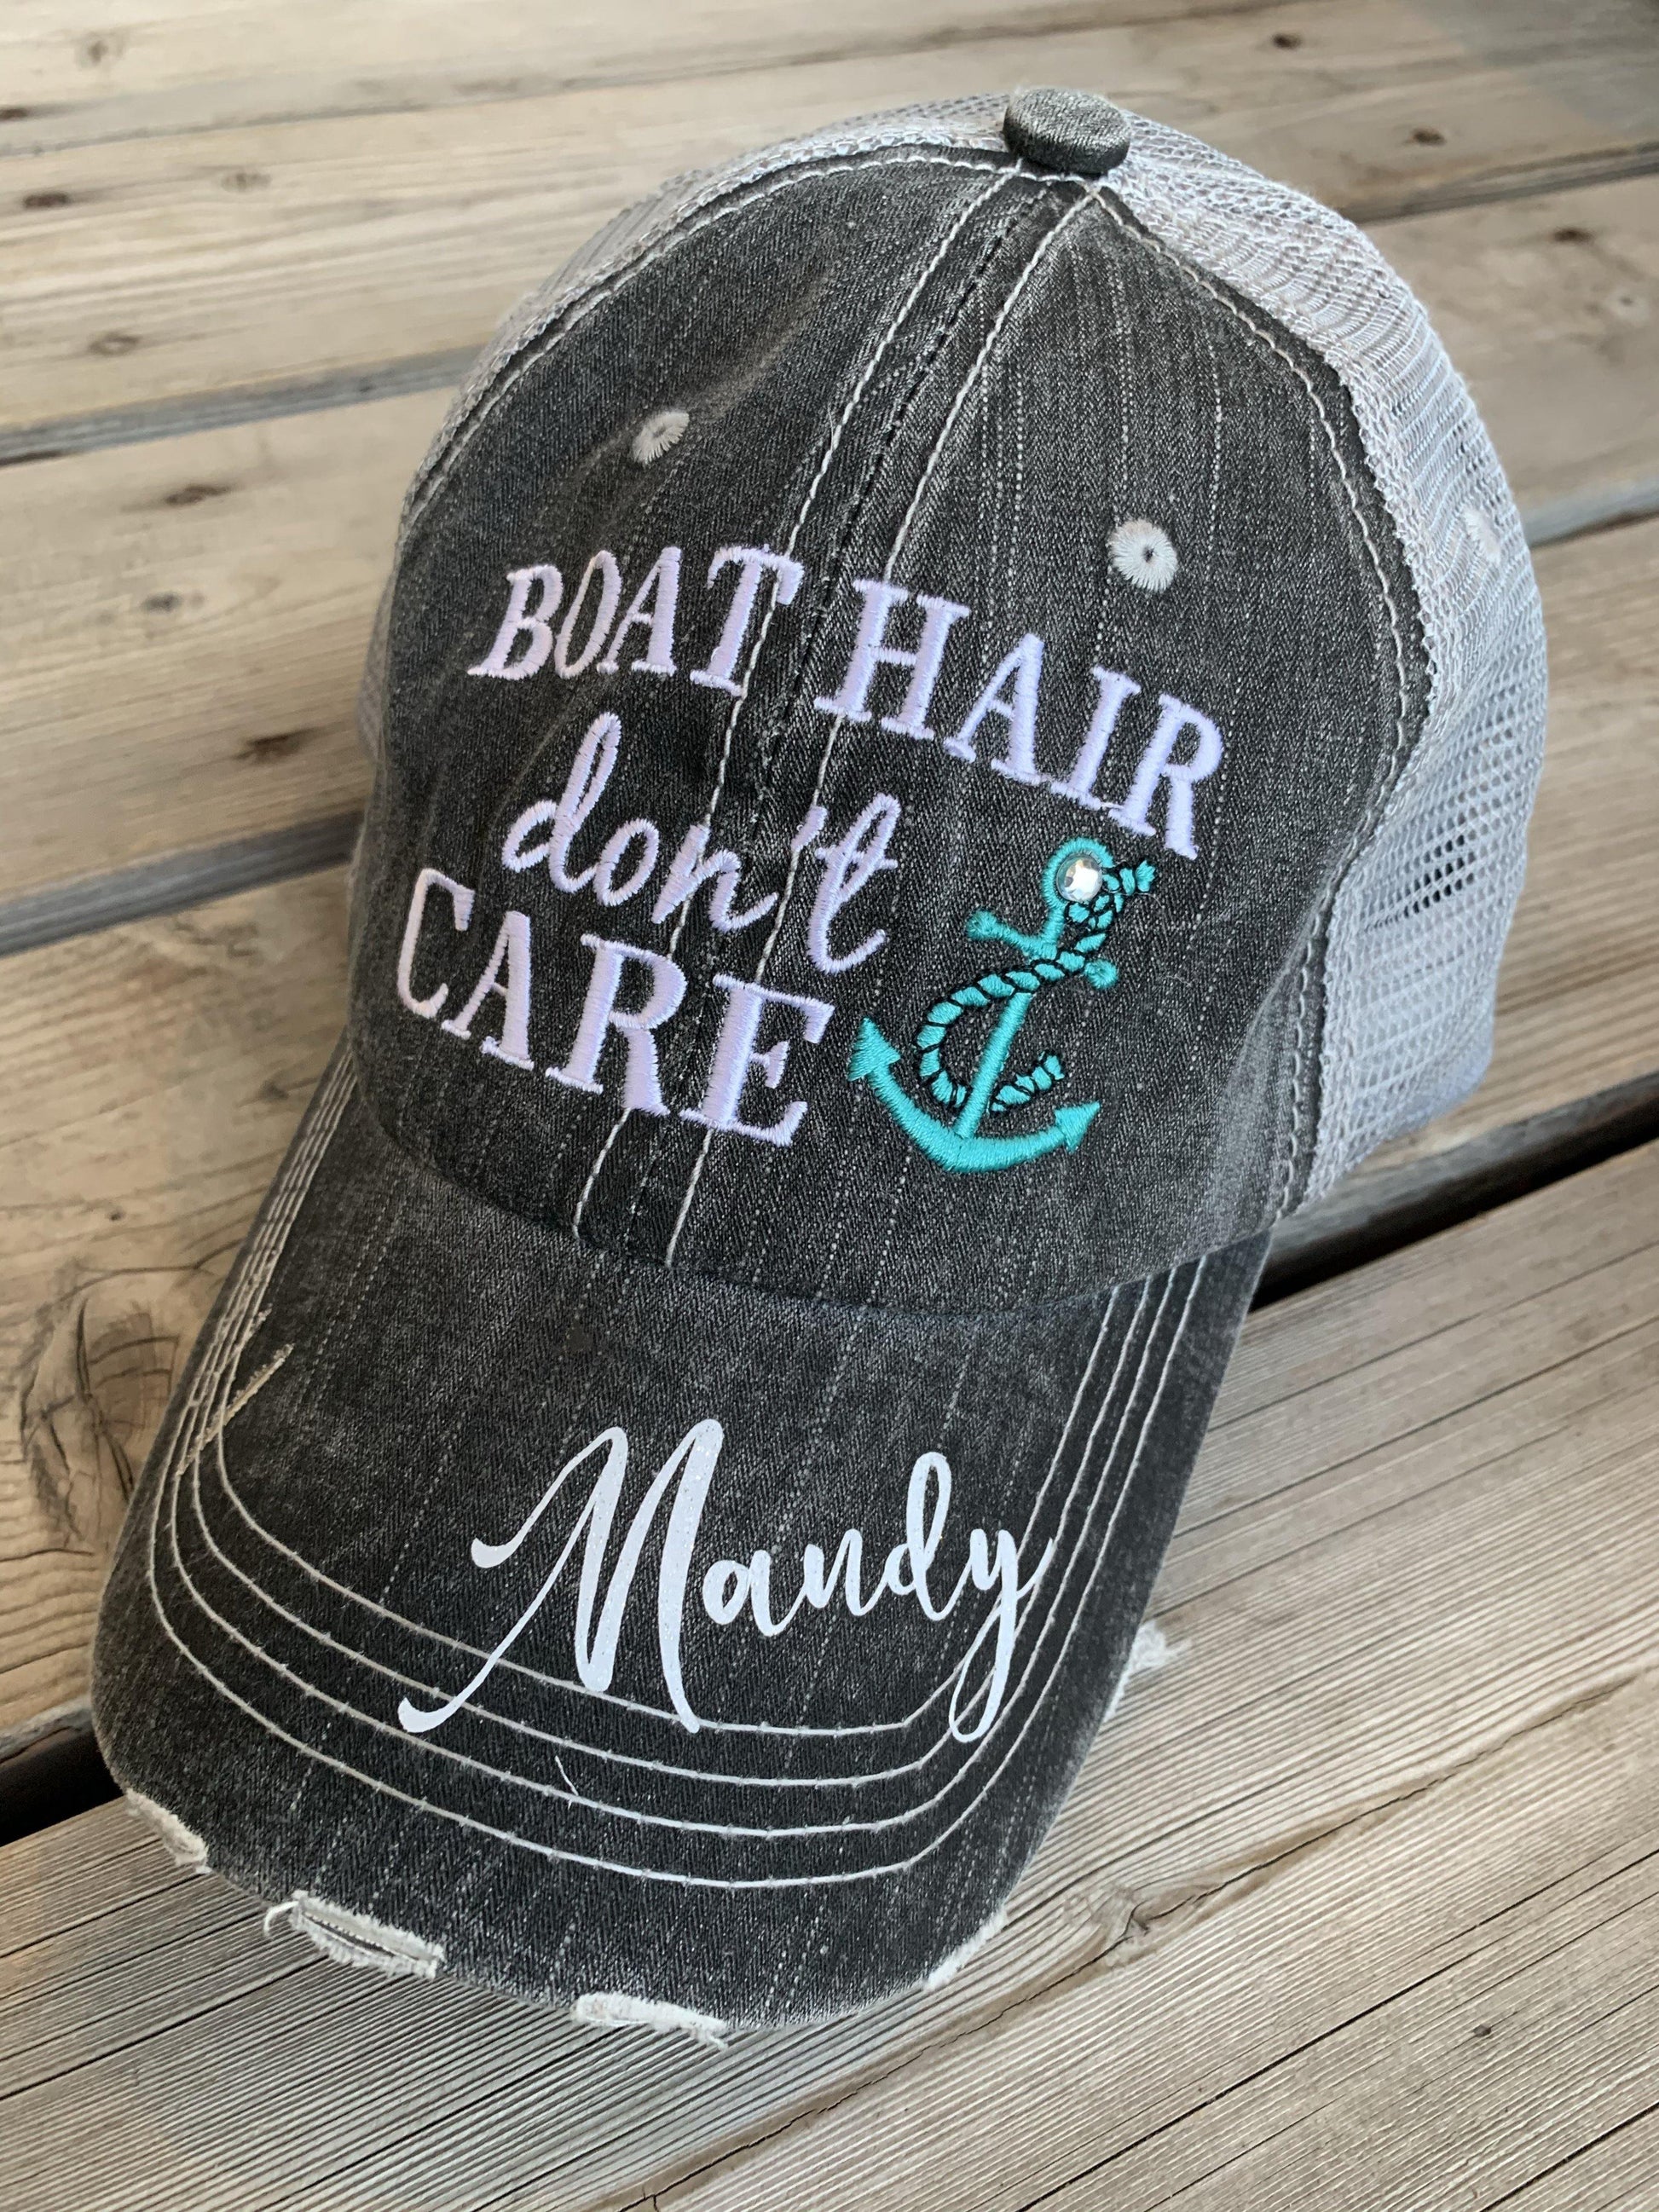 Boat Hats Boat Hair Dont Care Free Ship Are Embroidered Distressed Gray Trucker Hats Anchors Pink Teal Boating Hat. Boat Hair Dont Care. Teal Anchor.